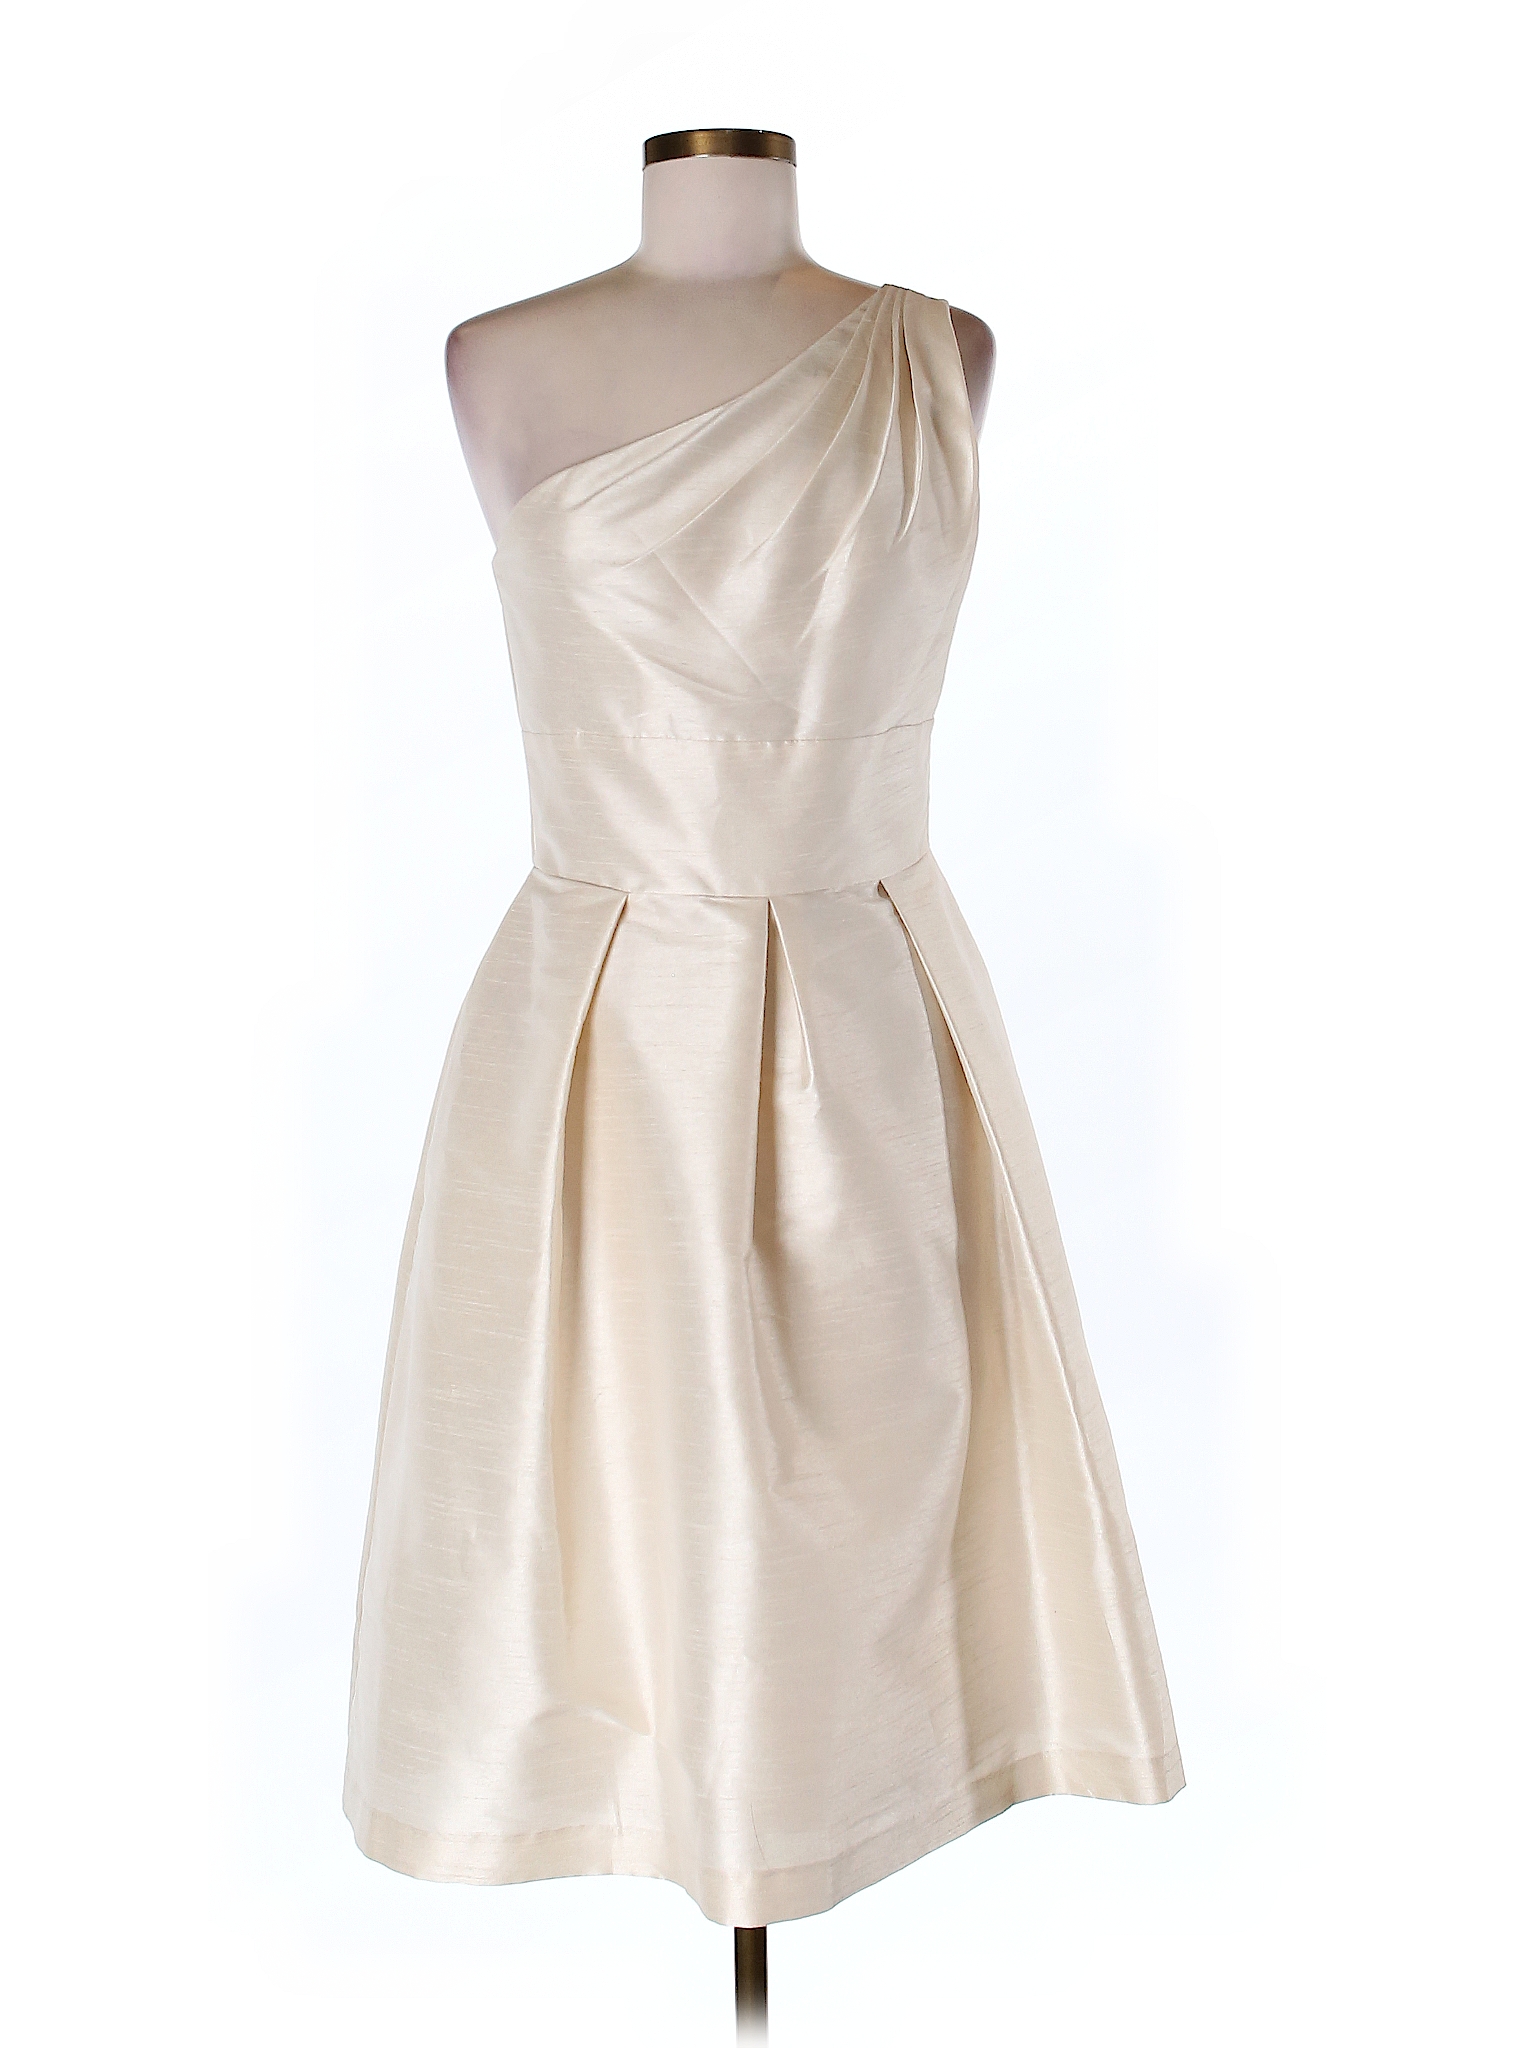 Alfred Sung 100% Polyester Solid Beige Cocktail Dress Size 6 - 73% off ...